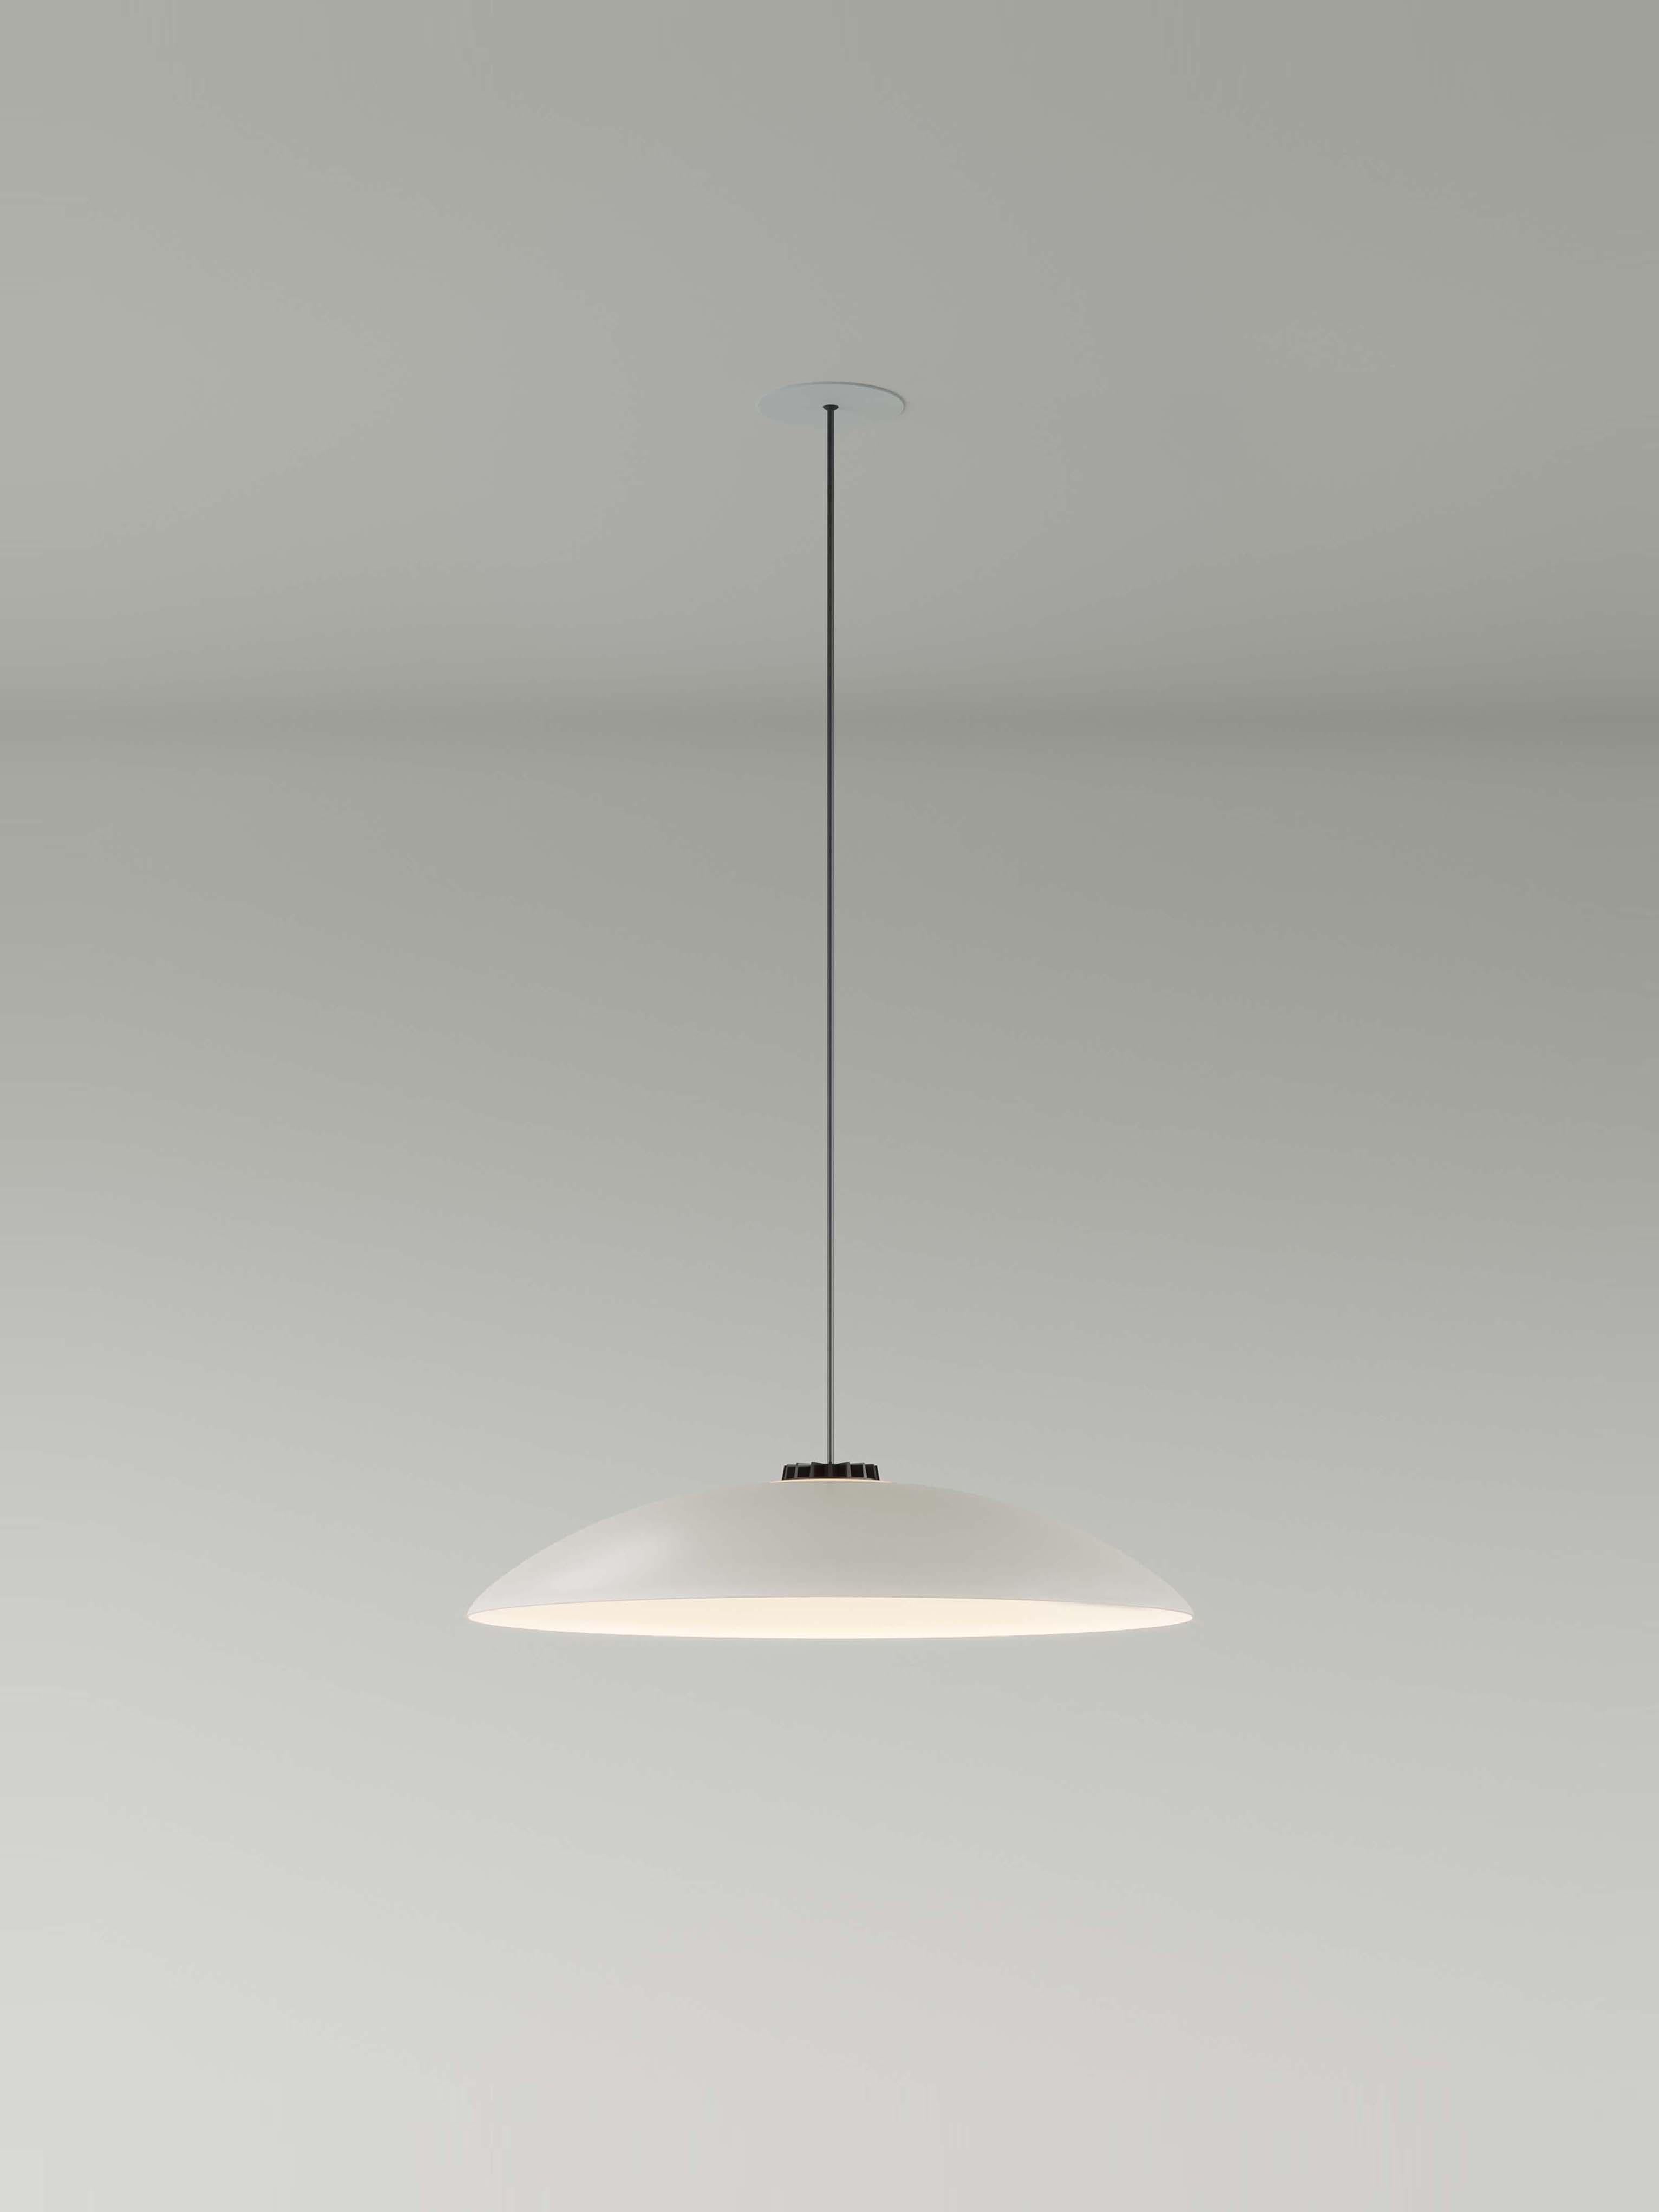 Medium white head hat plate pendant lamp by Santa & Cole
Dimensions: D 50 x H 10 cm
Materials: Metal.
Cable lenght: 3mts.
Available in other colors and sizes. Available in 2 cable lengths: 3mts, 8mts.
Availalble in 2 canopy colors: black or